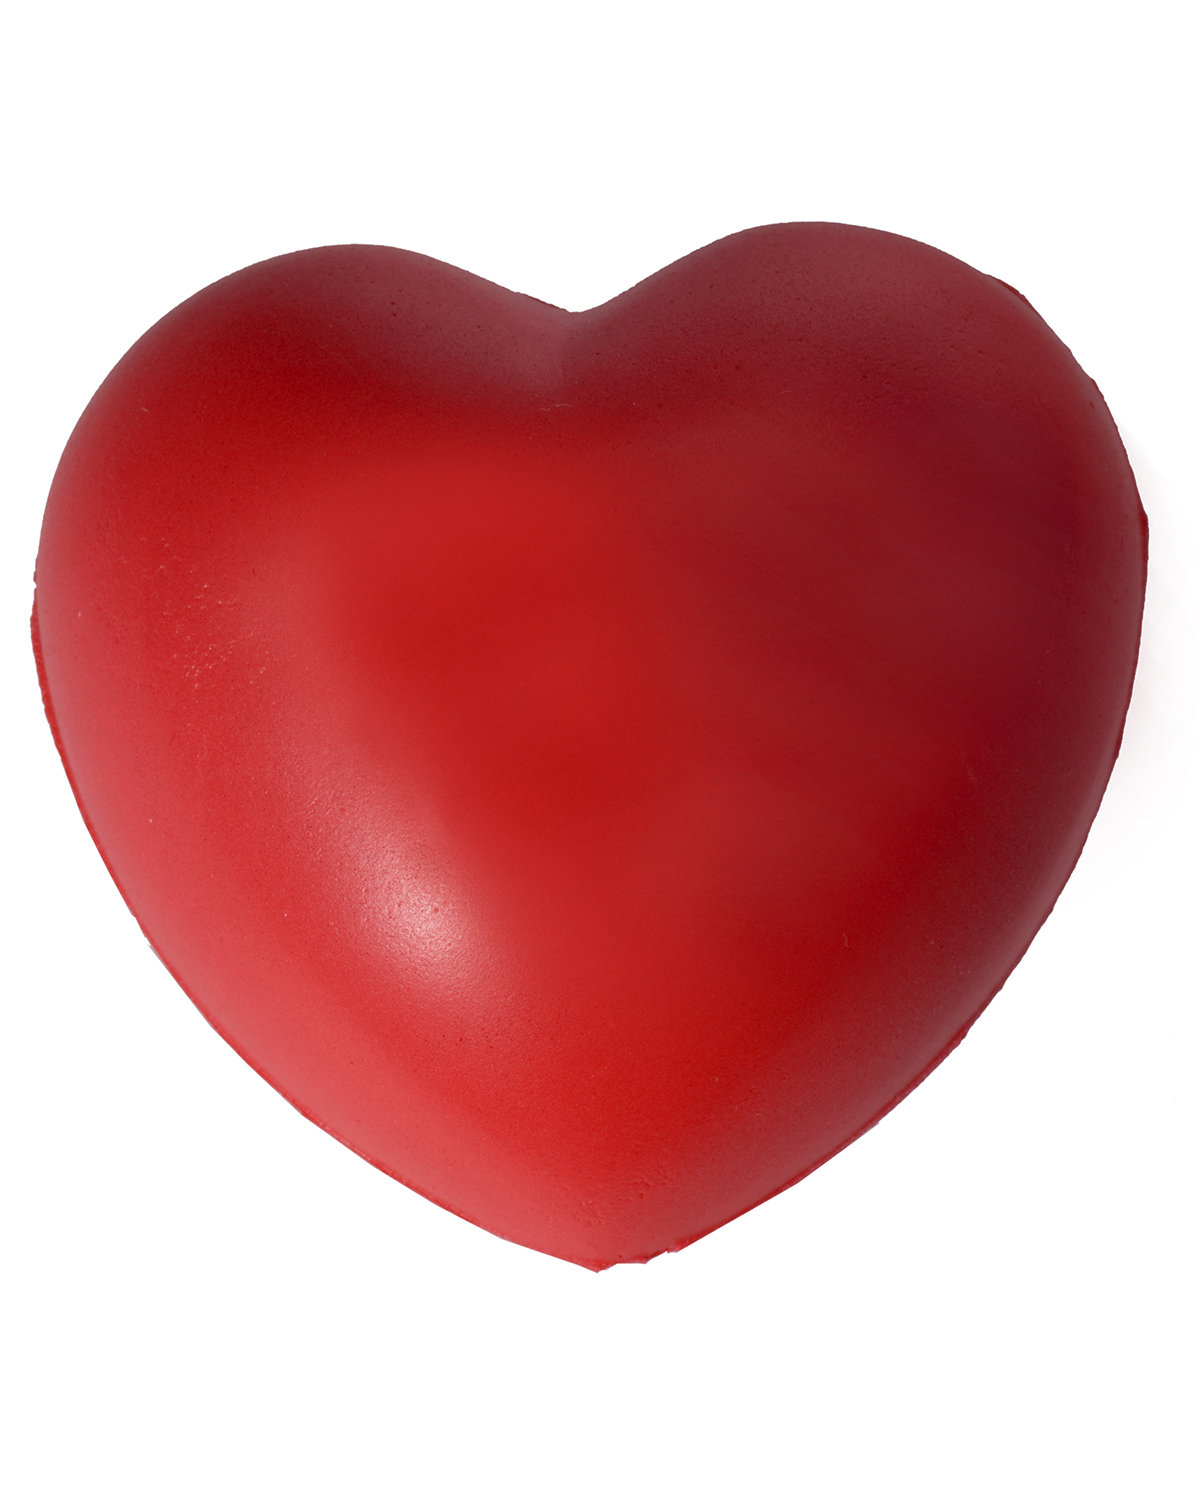 Prime Line Valentine Heart Stress Reliever red 